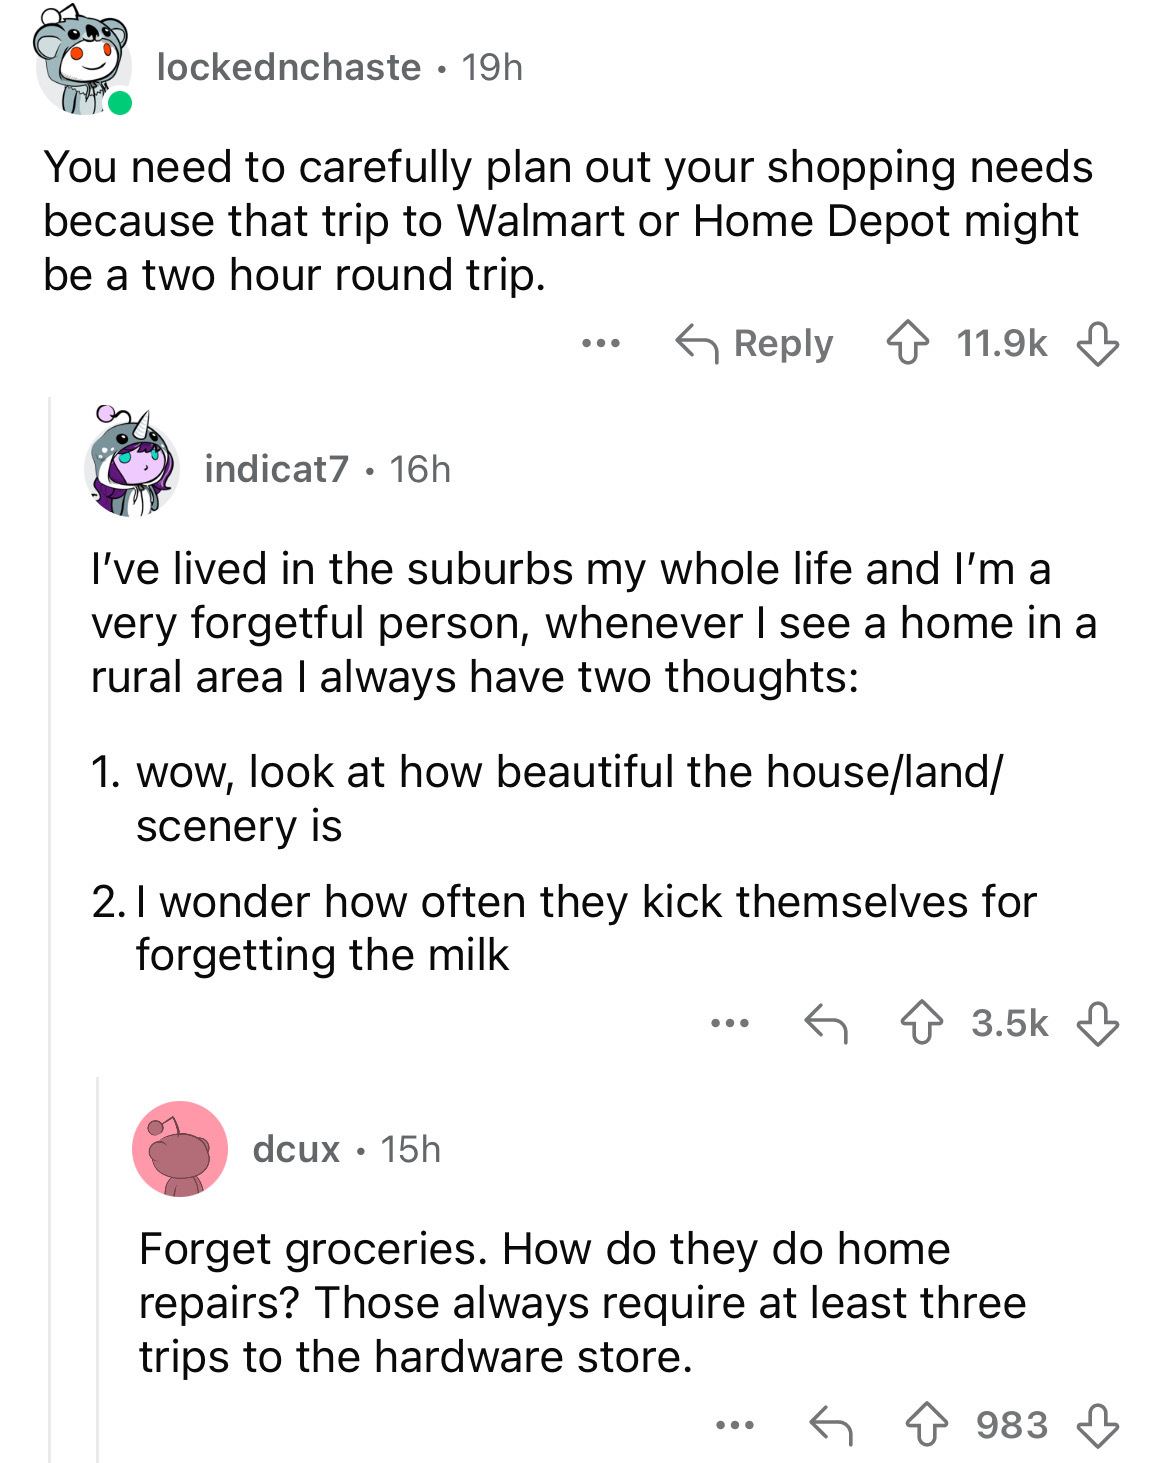 screenshot - lockednchaste 19h You need to carefully plan out your shopping needs because that trip to Walmart or Home Depot might be a two hour round trip. ... indicat7 16h I've lived in the suburbs my whole life and I'm a very forgetful person, whenever